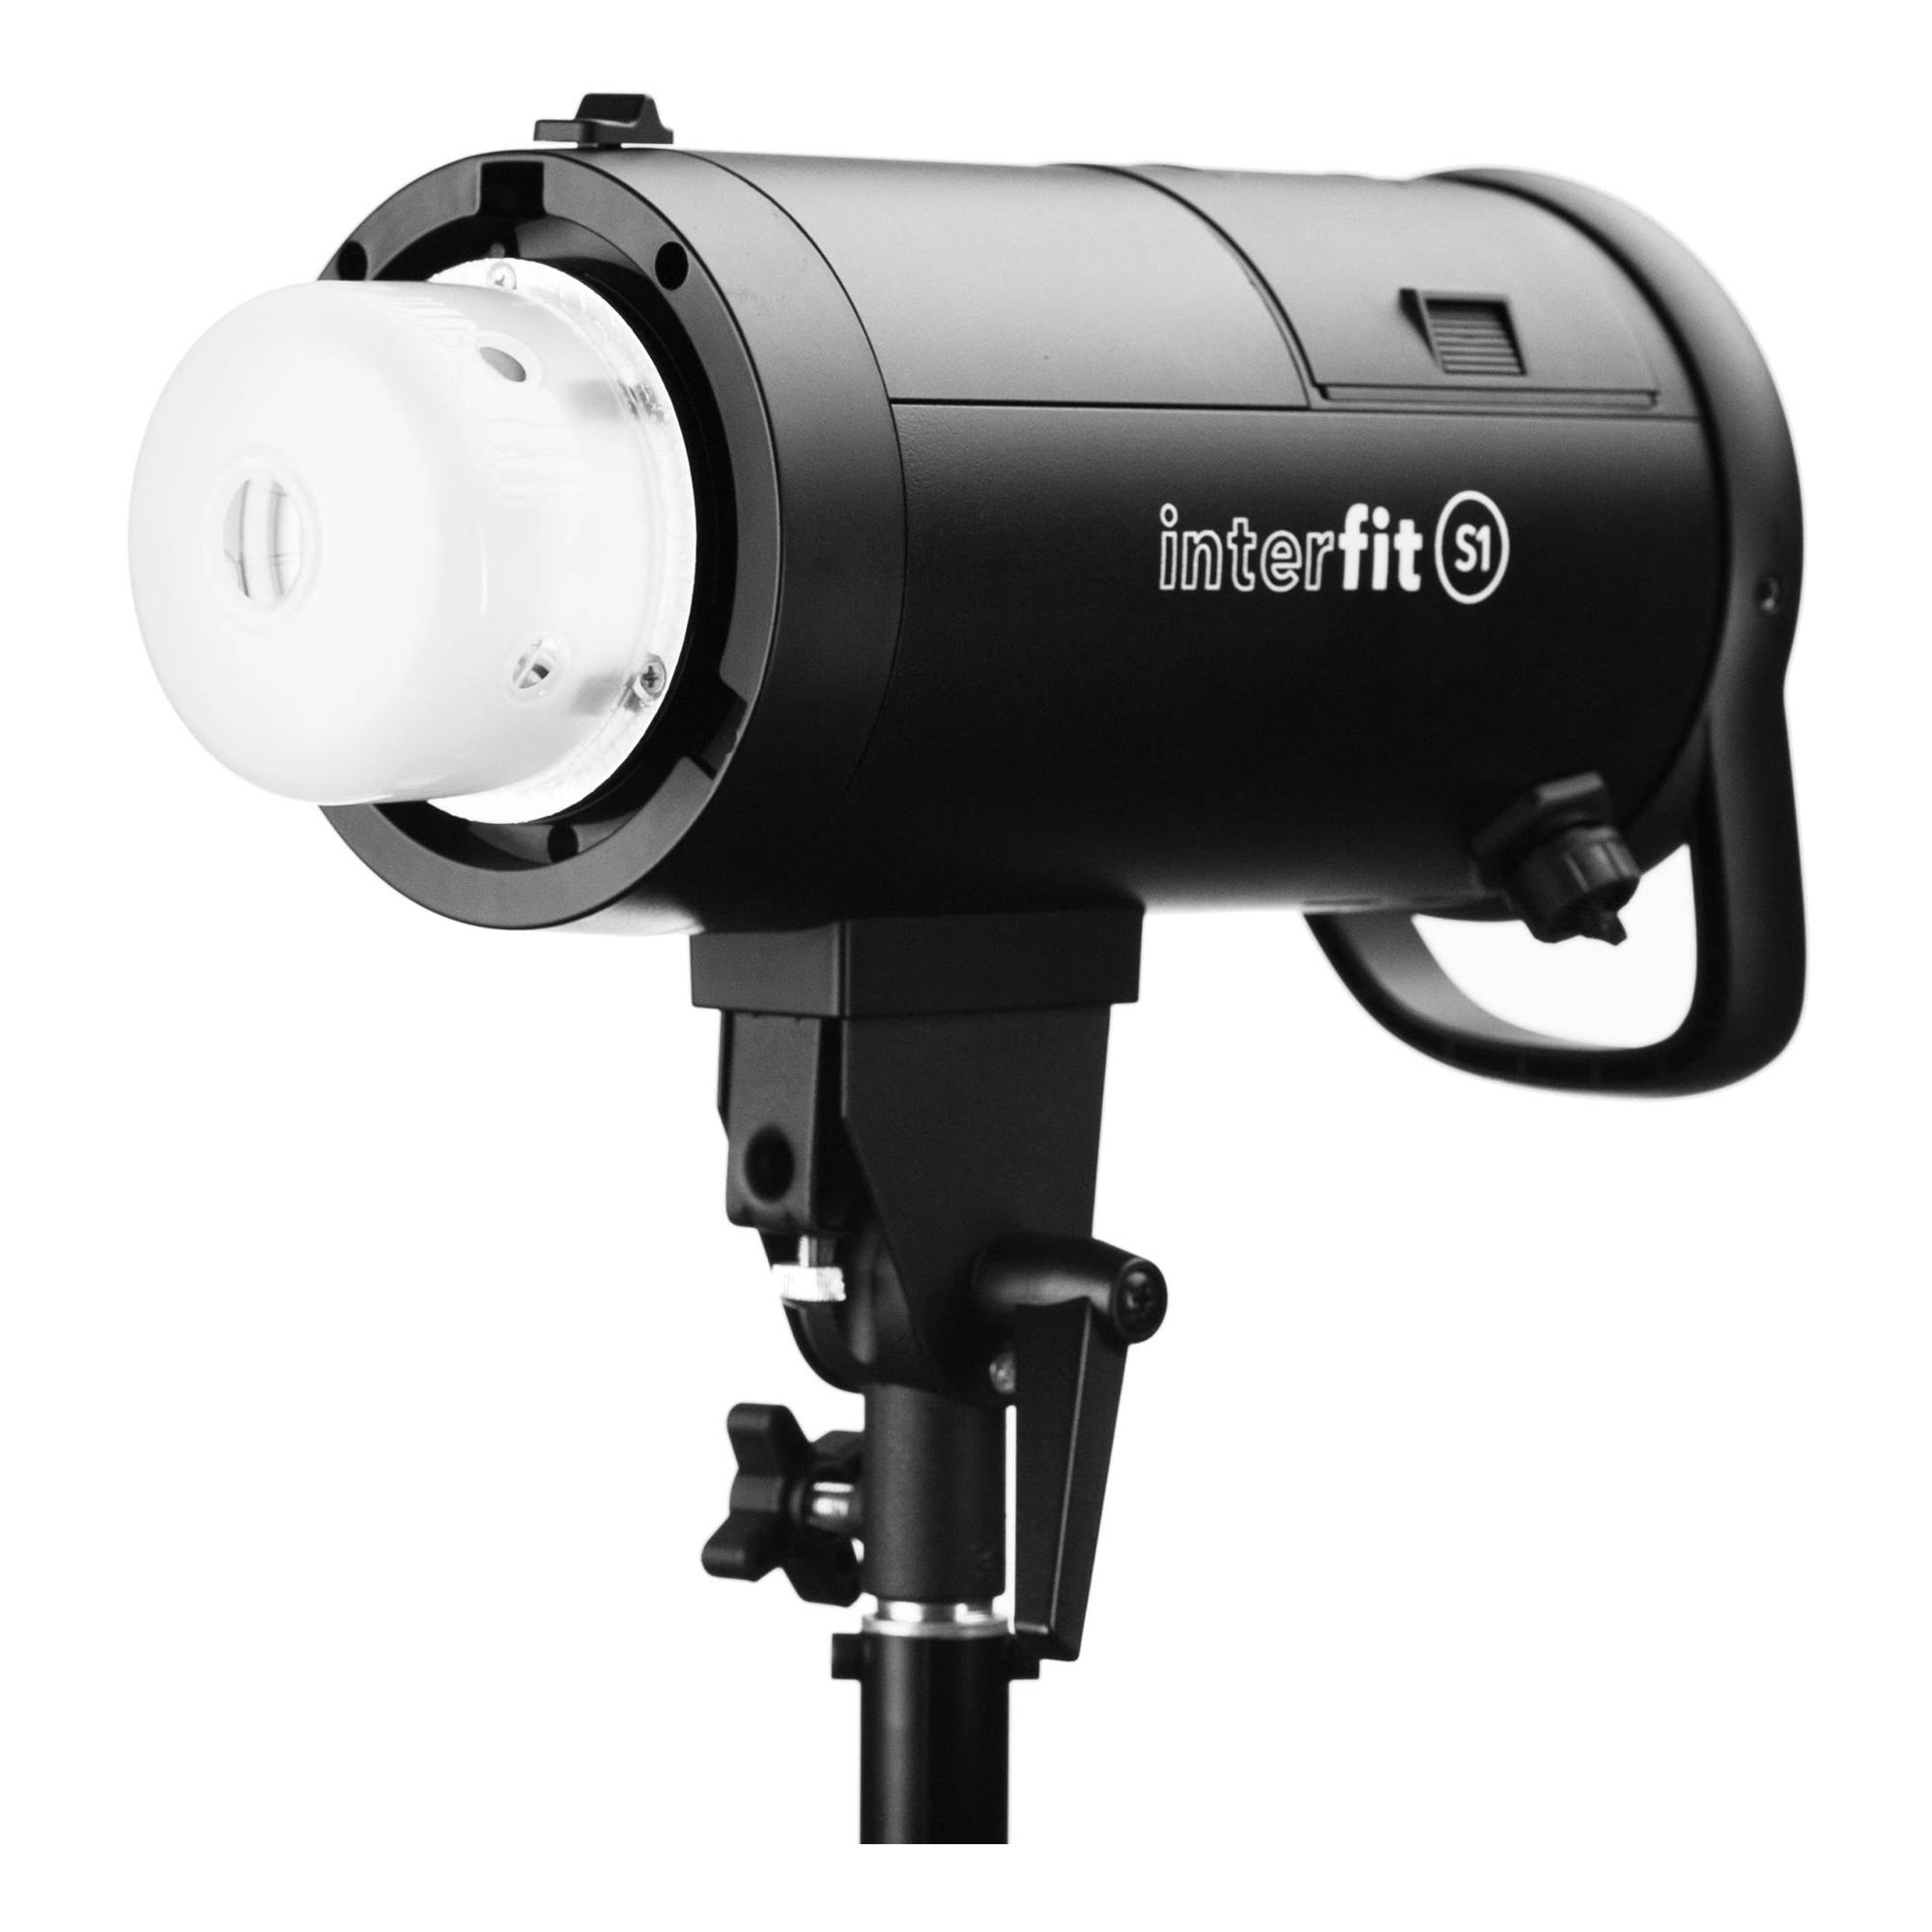  Interfit Photographic Interfit S1 500Ws HSS TTL AC and Battery-Powered Off-Camera Flash, Color Accurate 5700K +/- 100K, High Speed Sync to 1/8000s, Includes AC Power Pack and Removable Inline Lithium...